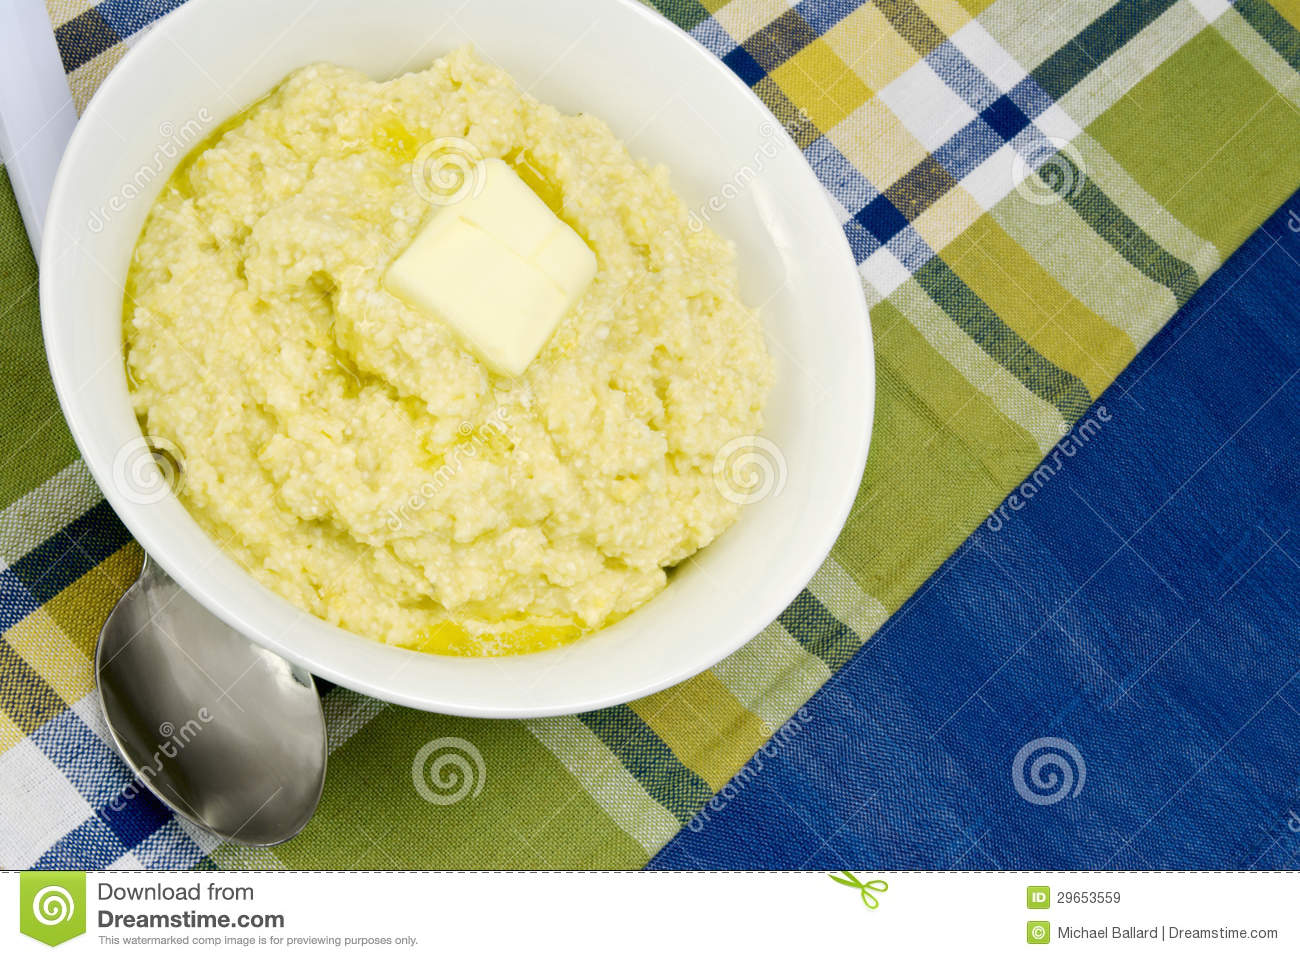 Cheese Grits With A Dollop Of Melting Butter  Grits Are Corn Based